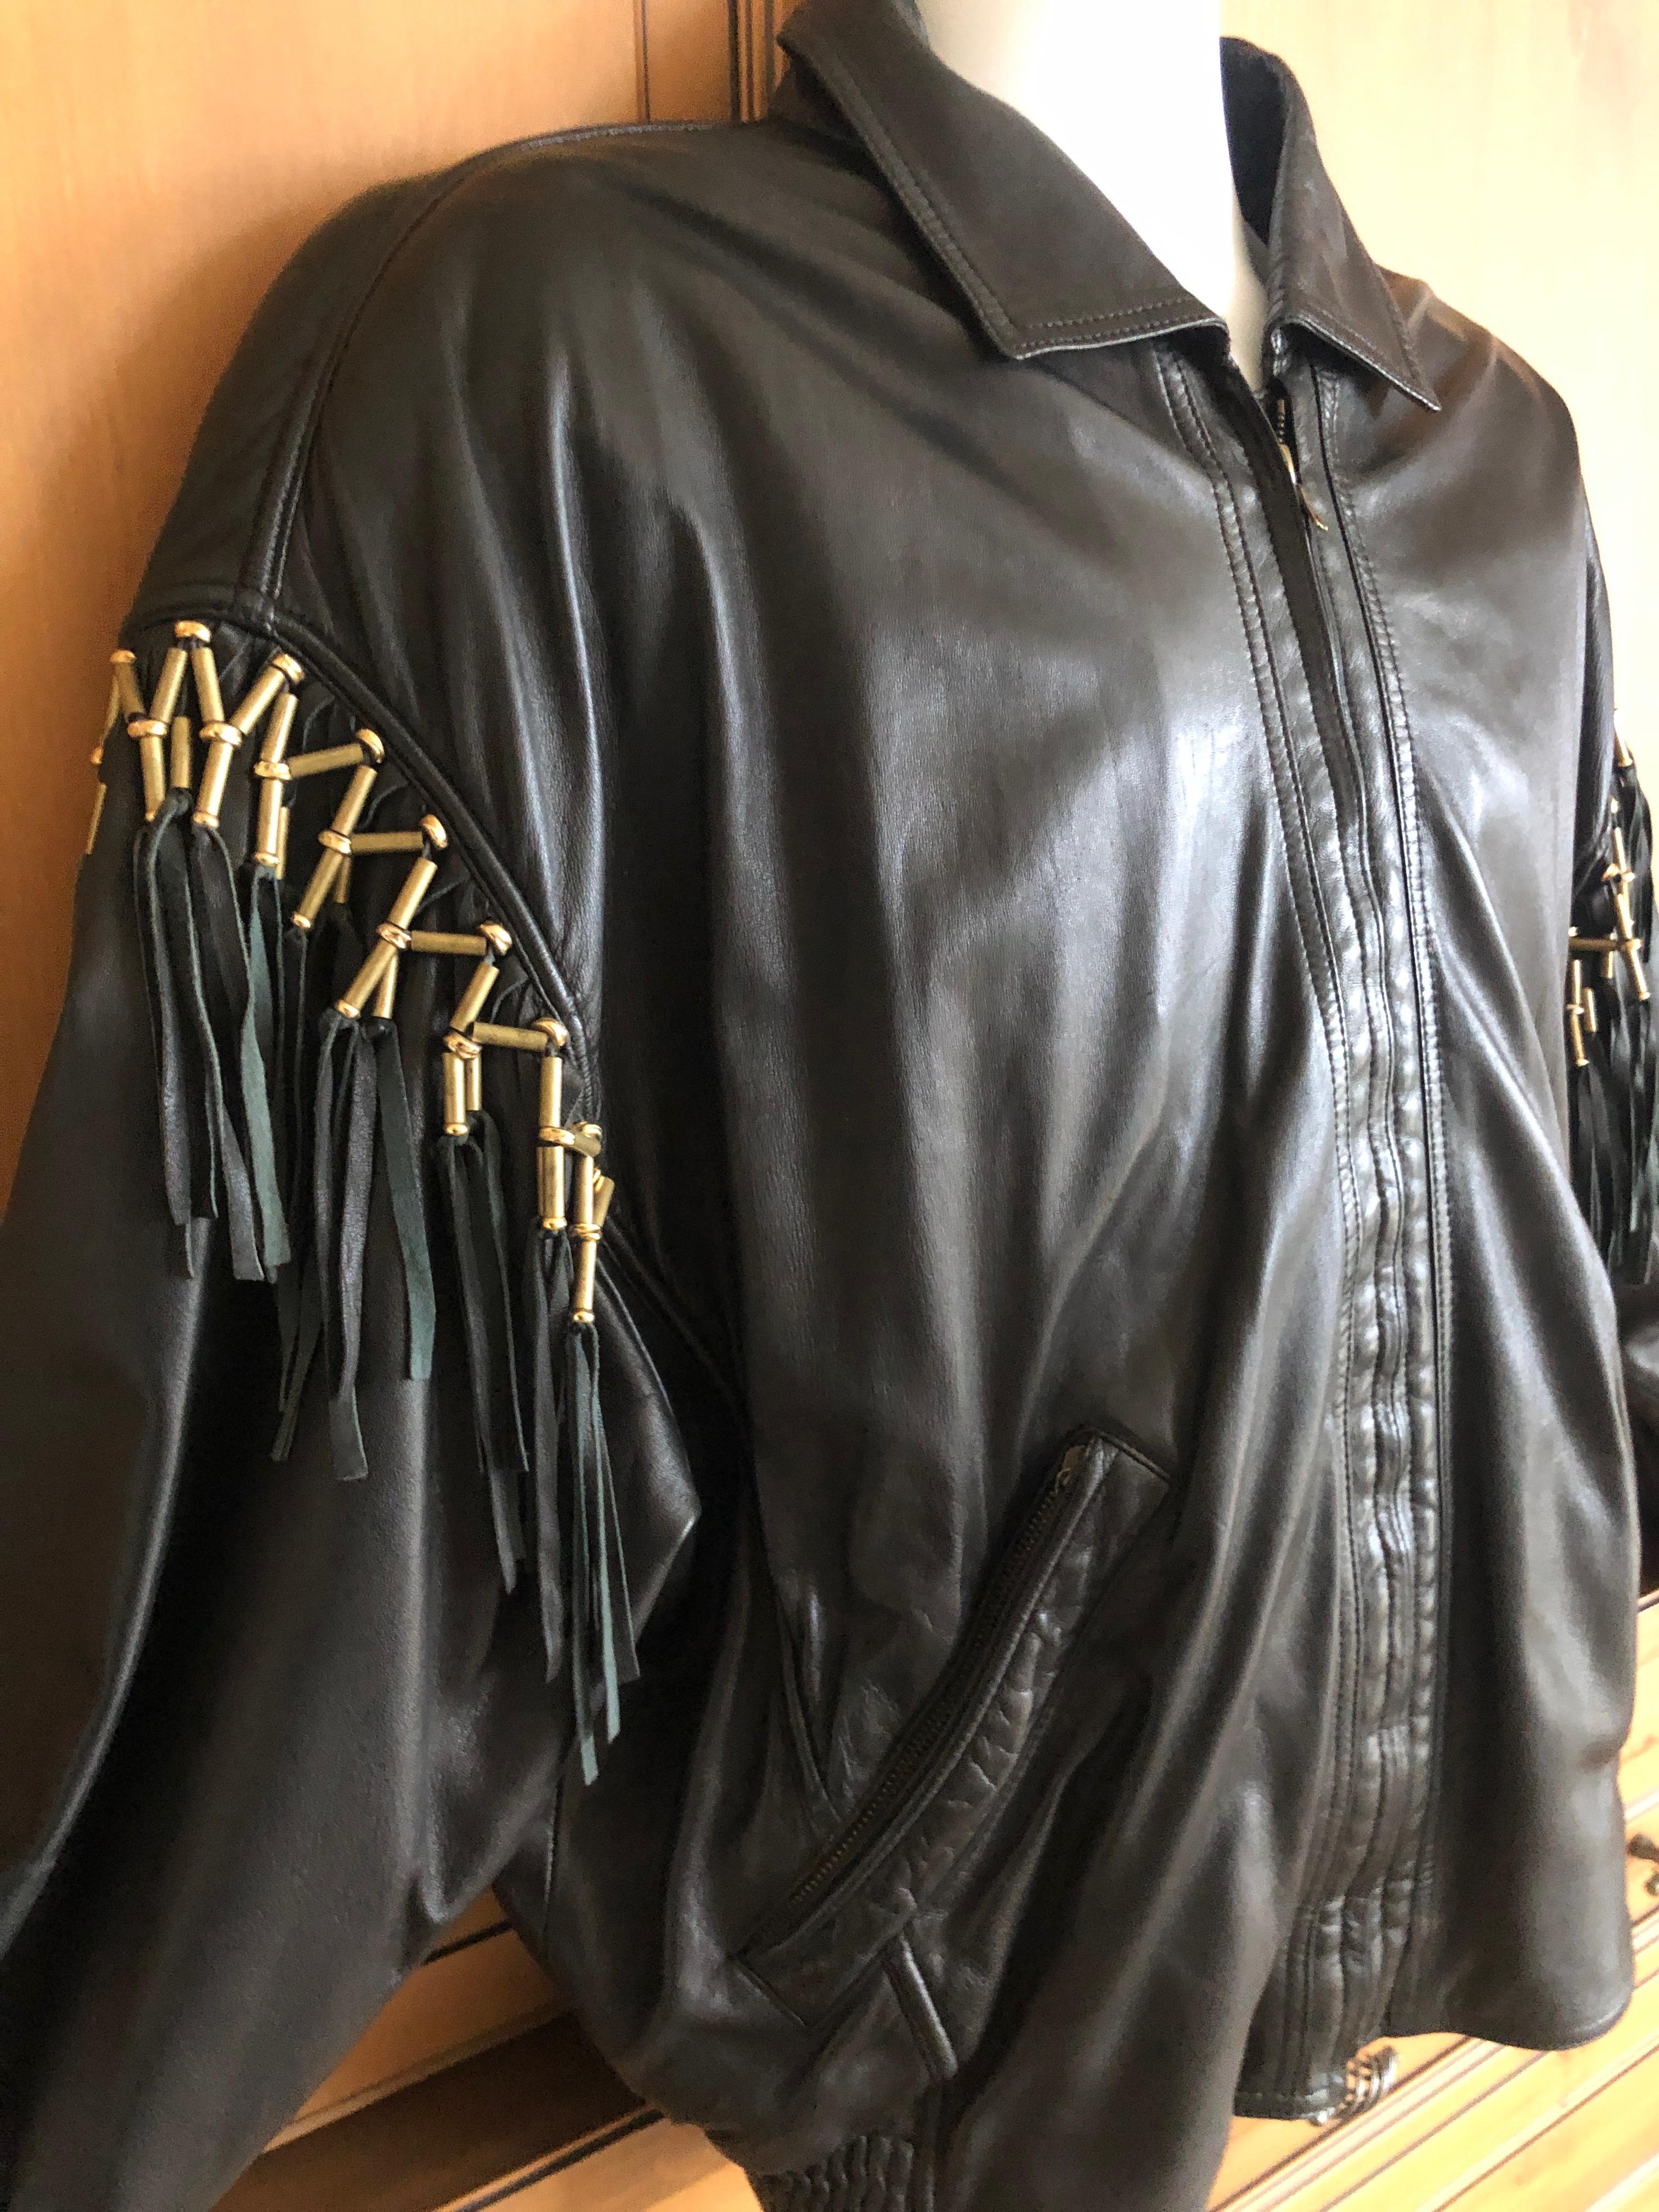 Gianni Versace 1984 Lambskin Leather Men's Jacket with Beaded Fringe For Sale 4